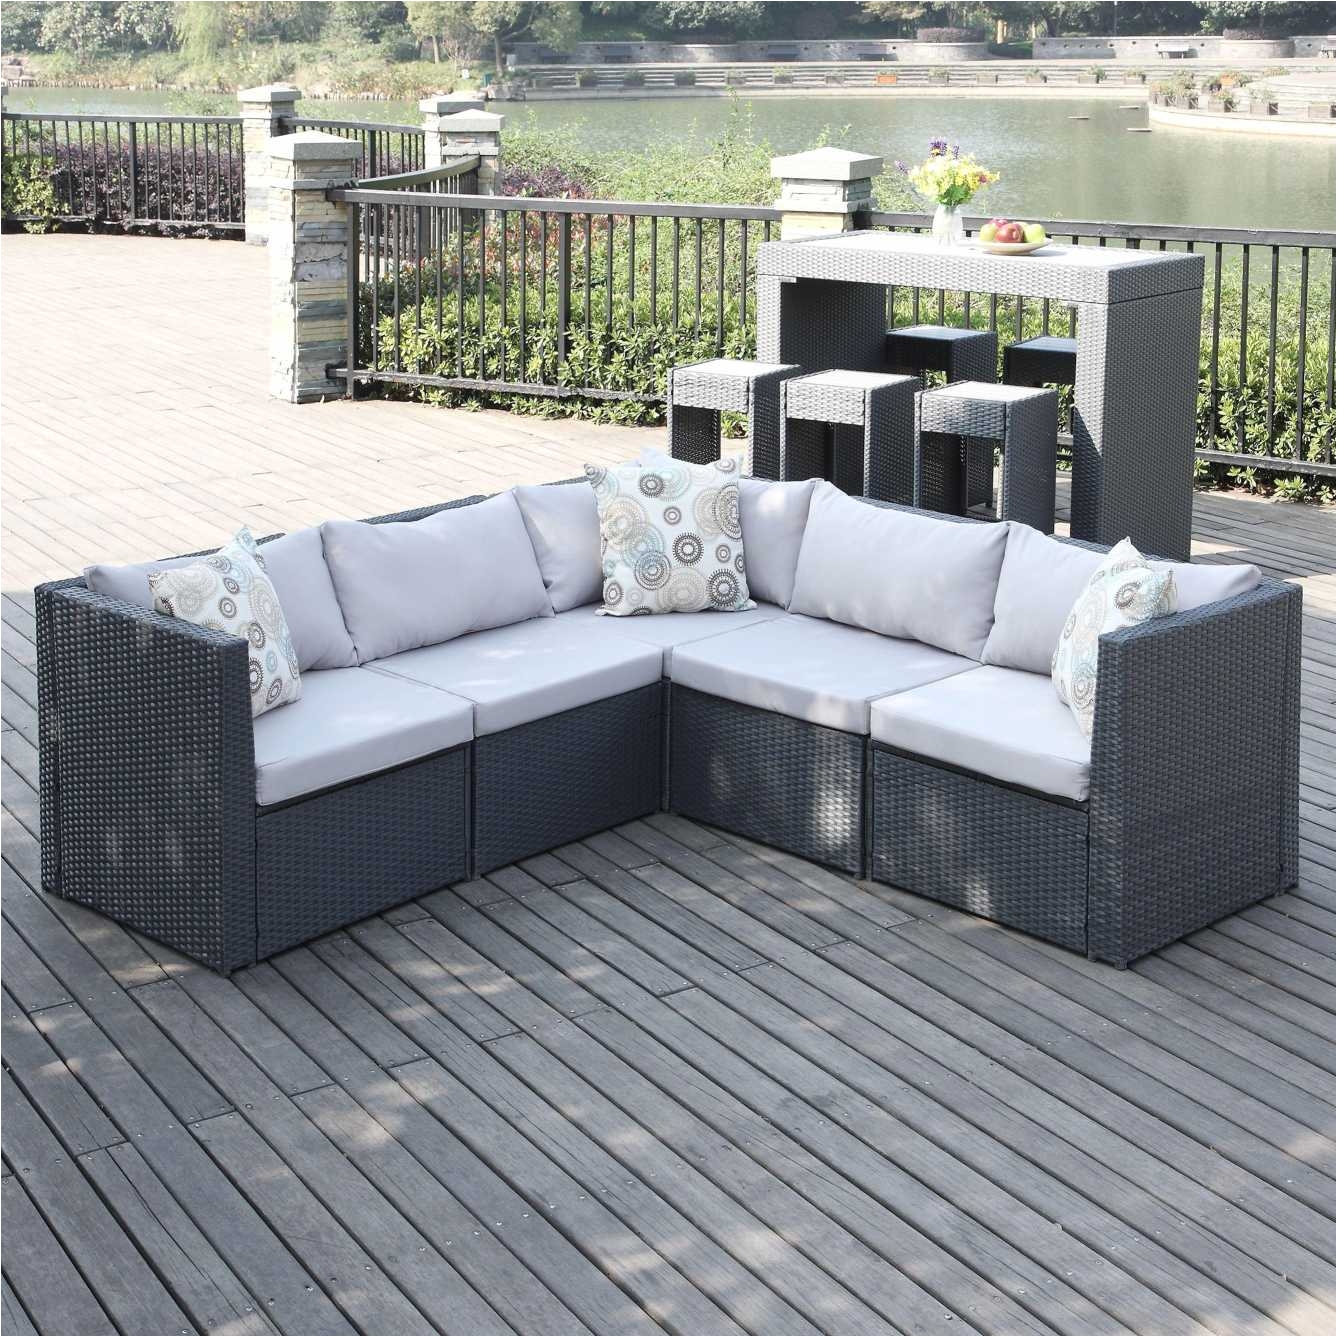 cheap patio furniture sets inspirational furniture wicker loveseat lovely wicker outdoor sofa 0d patio cheap